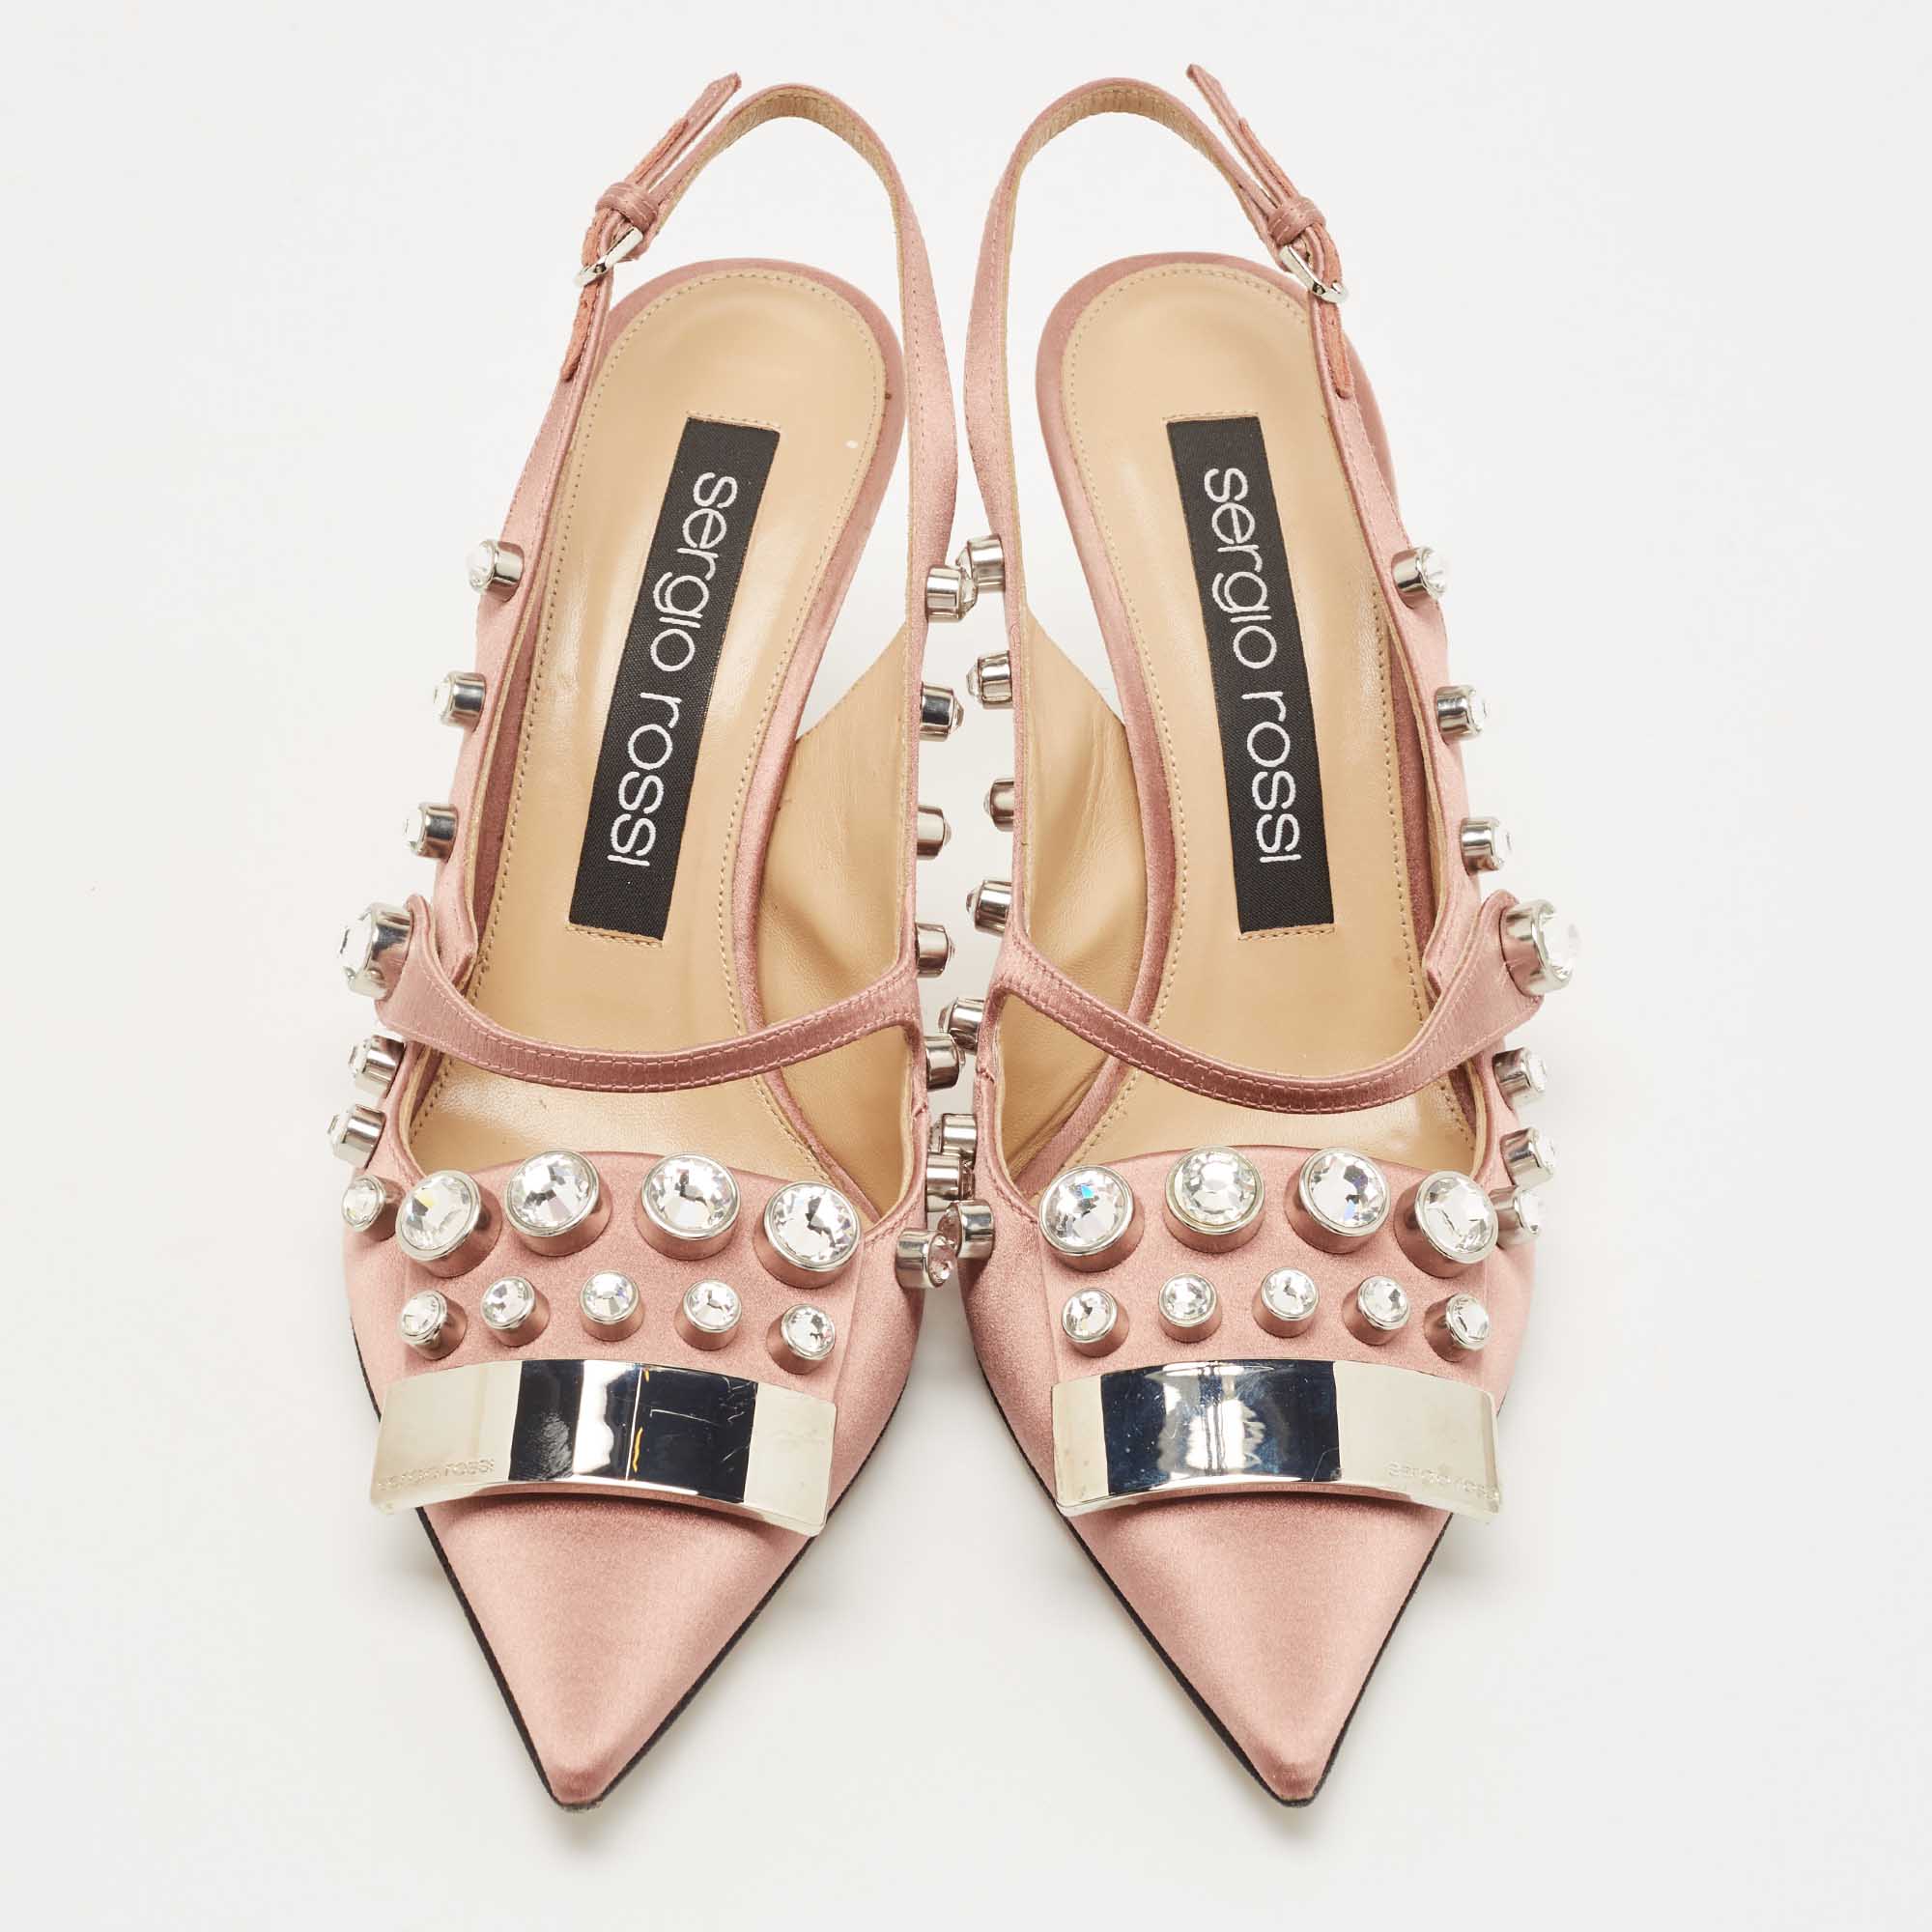 Sergio Rossi Pink Satin Crystal Studded Slingback Pumps Size 39